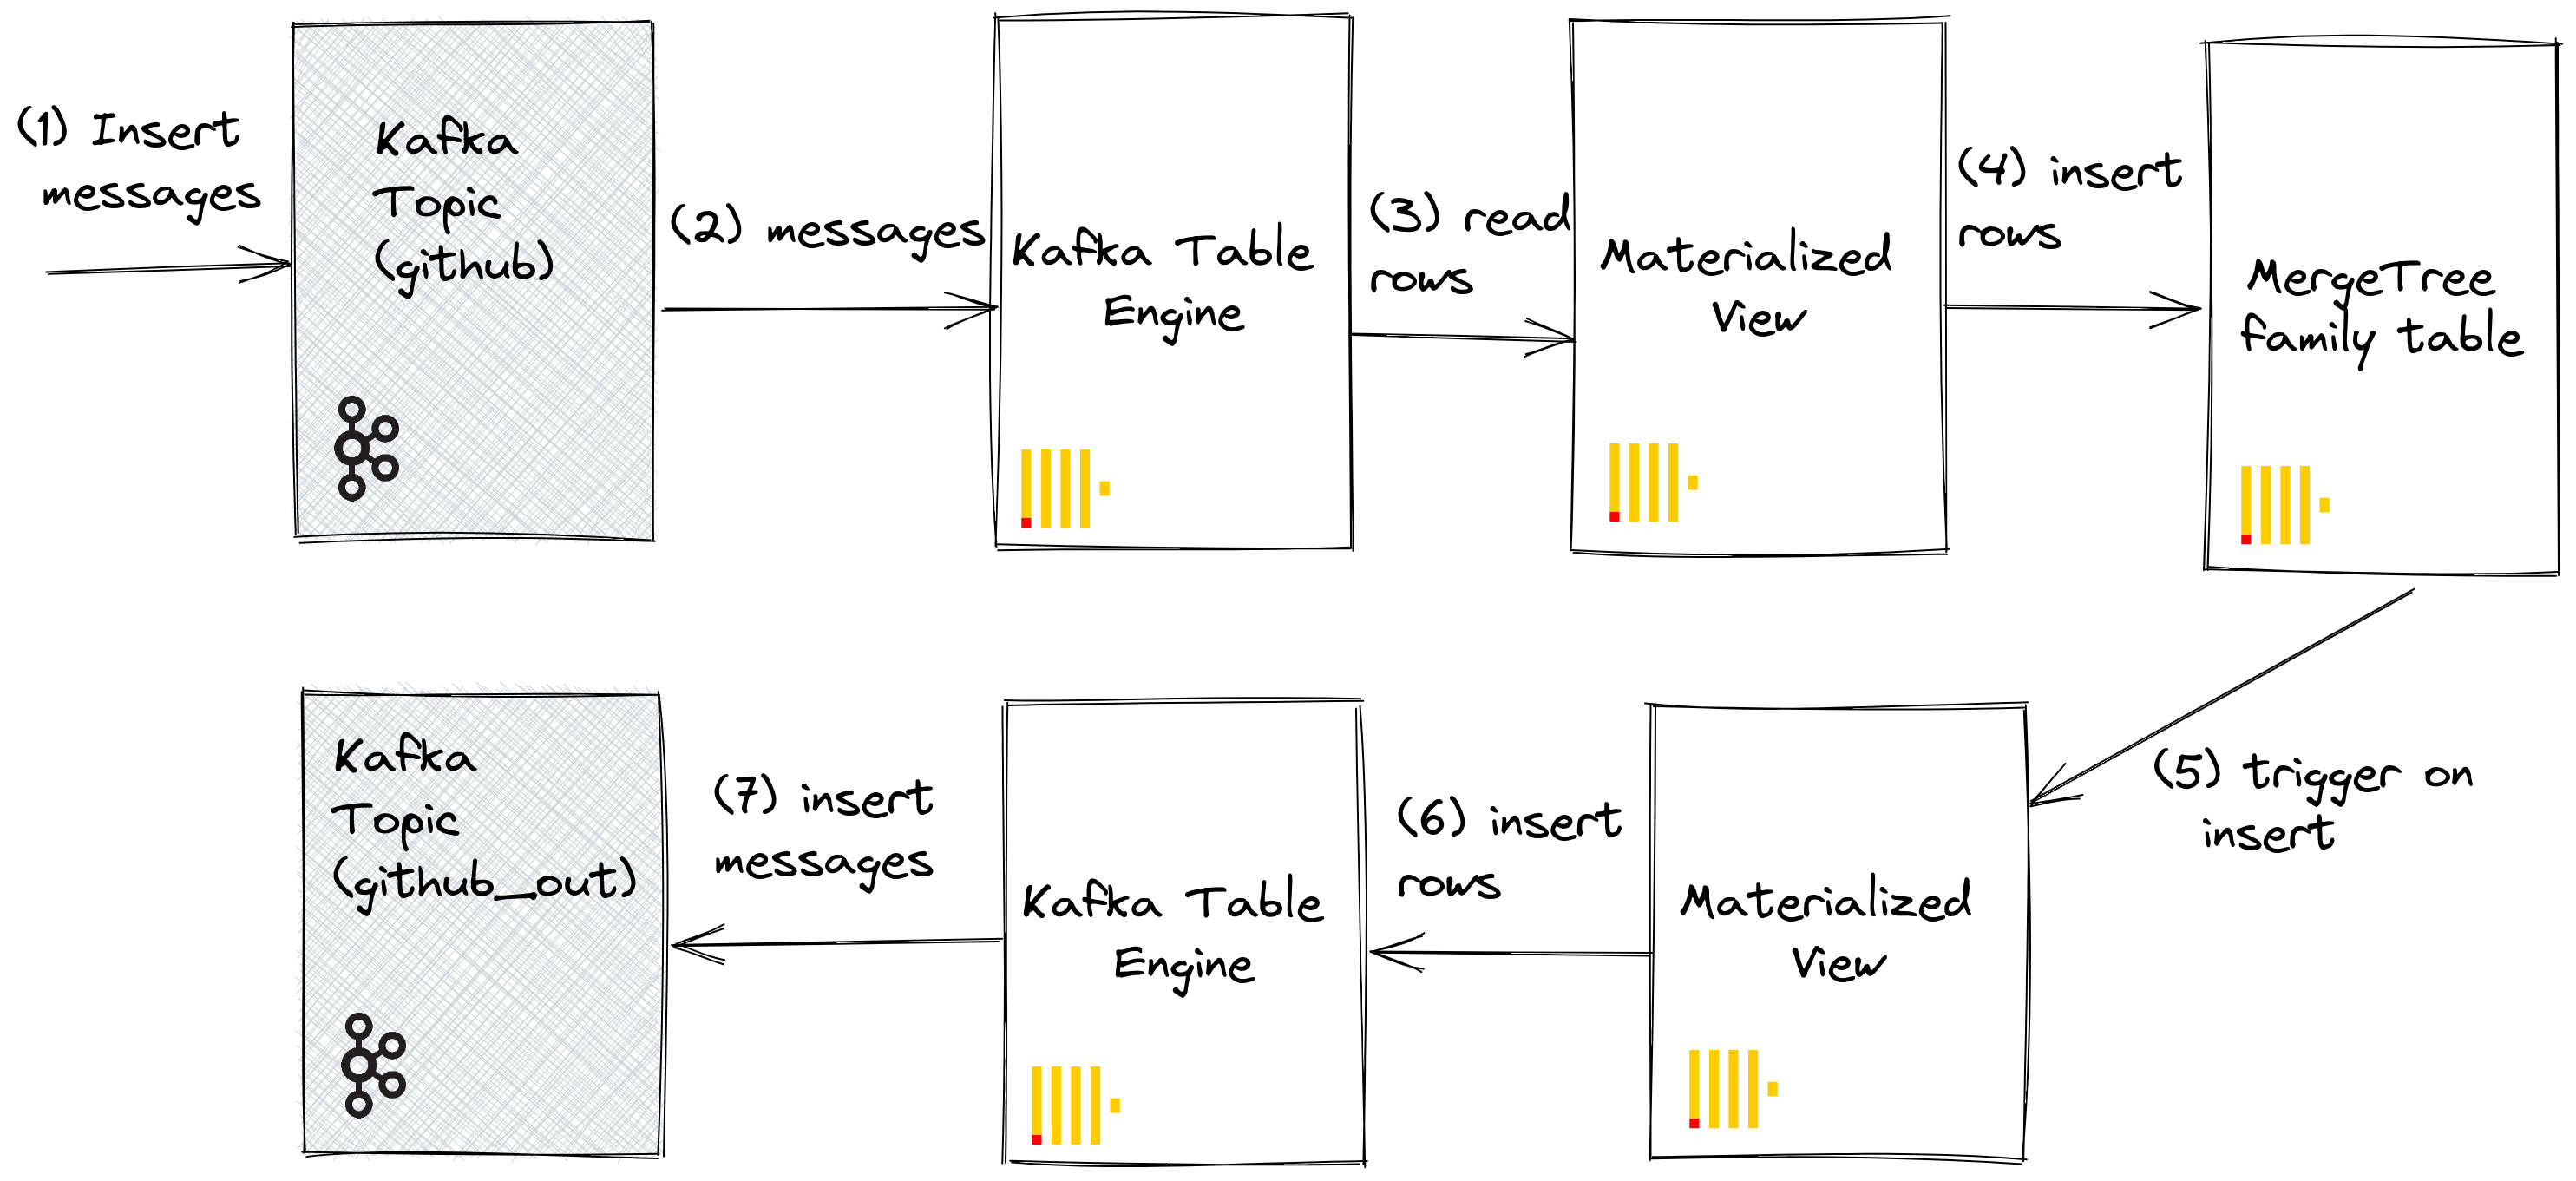 Kafka table engine inserts with materialized view